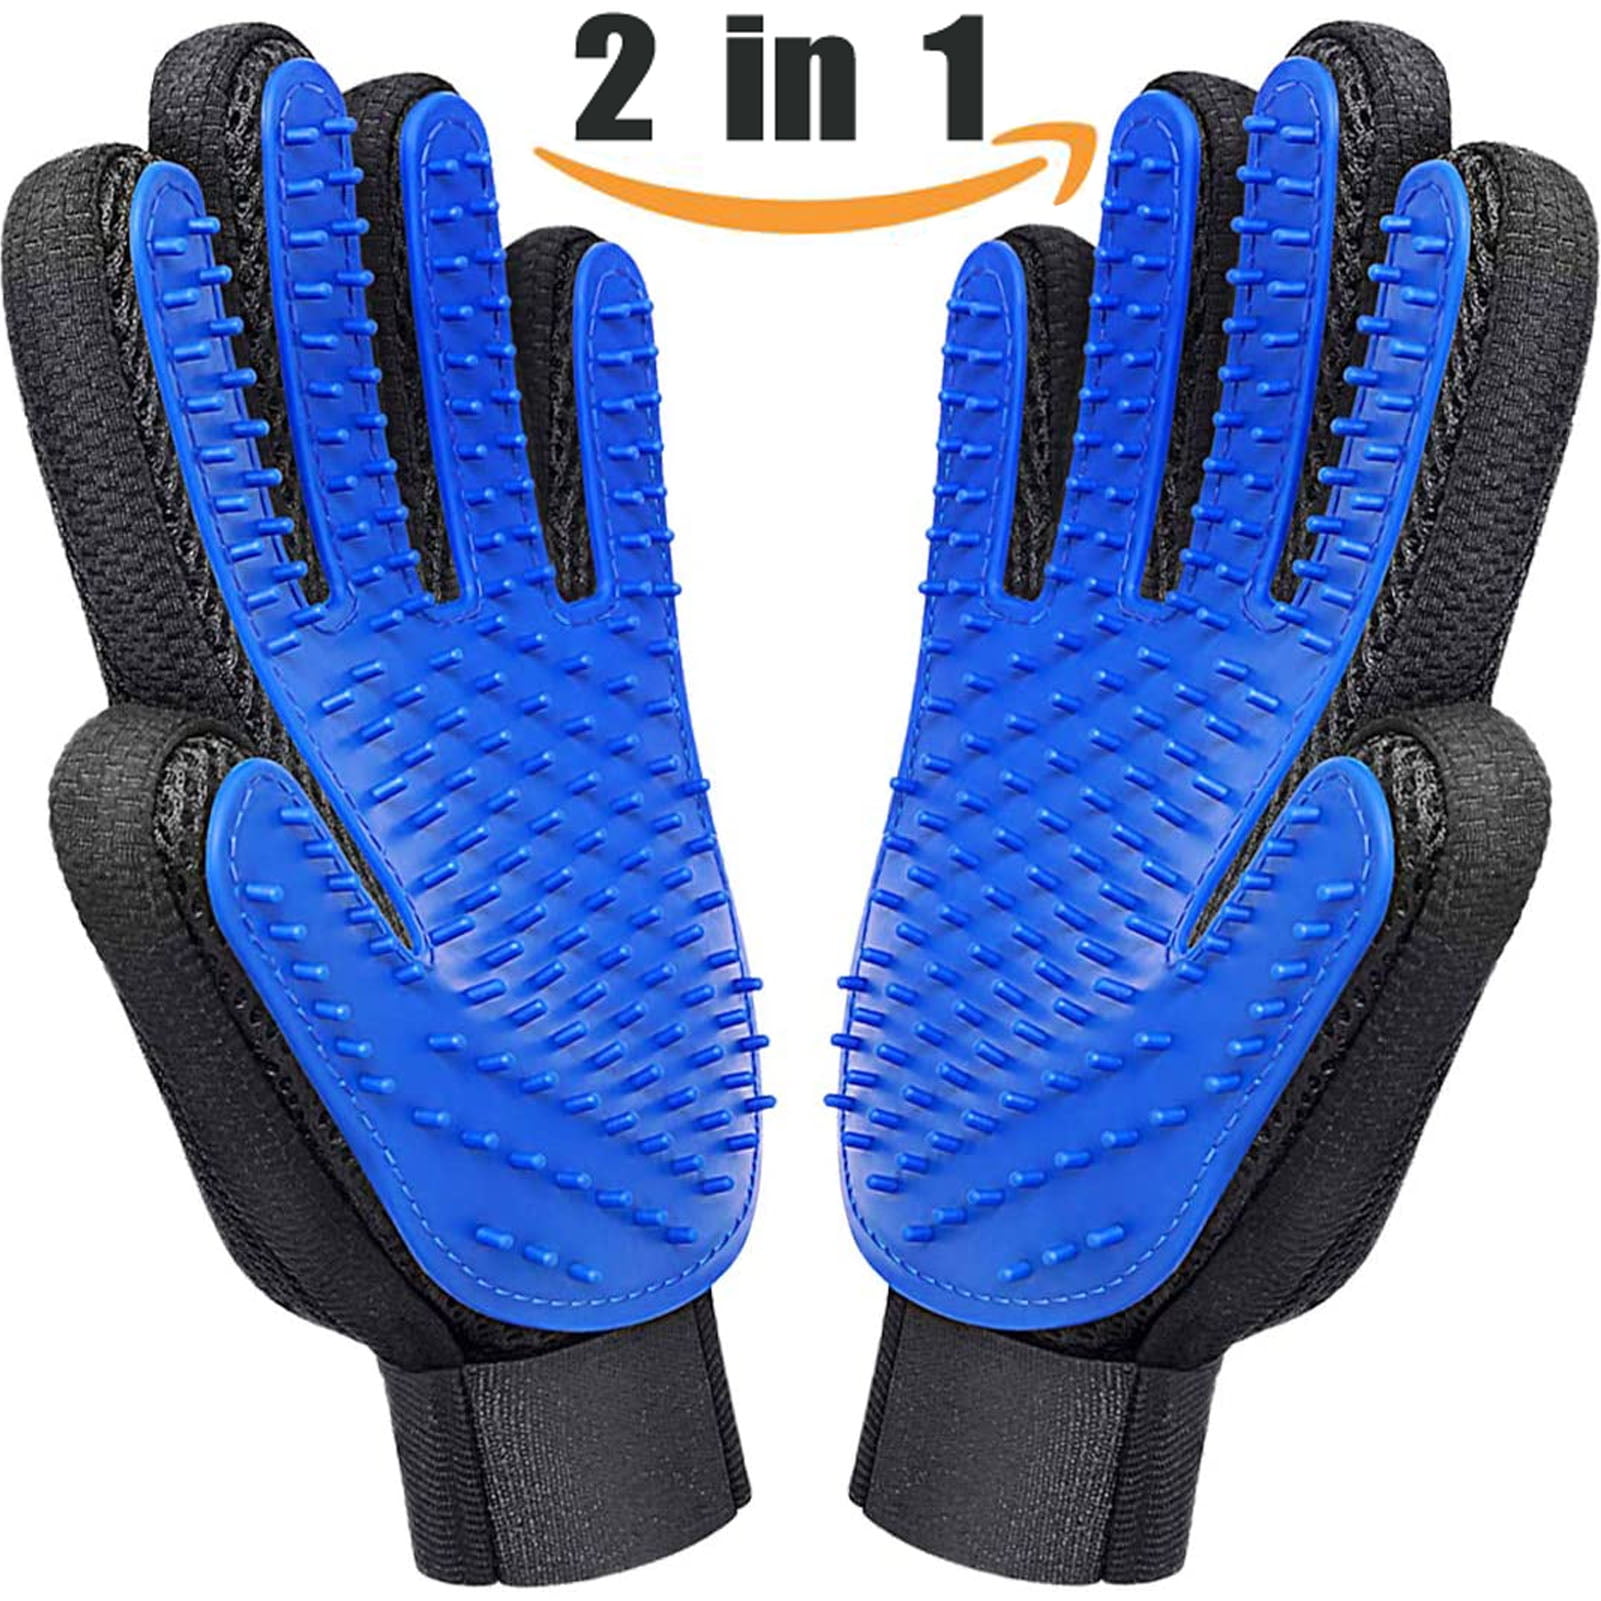 one size Adams boys winter magic gloves two pair pack